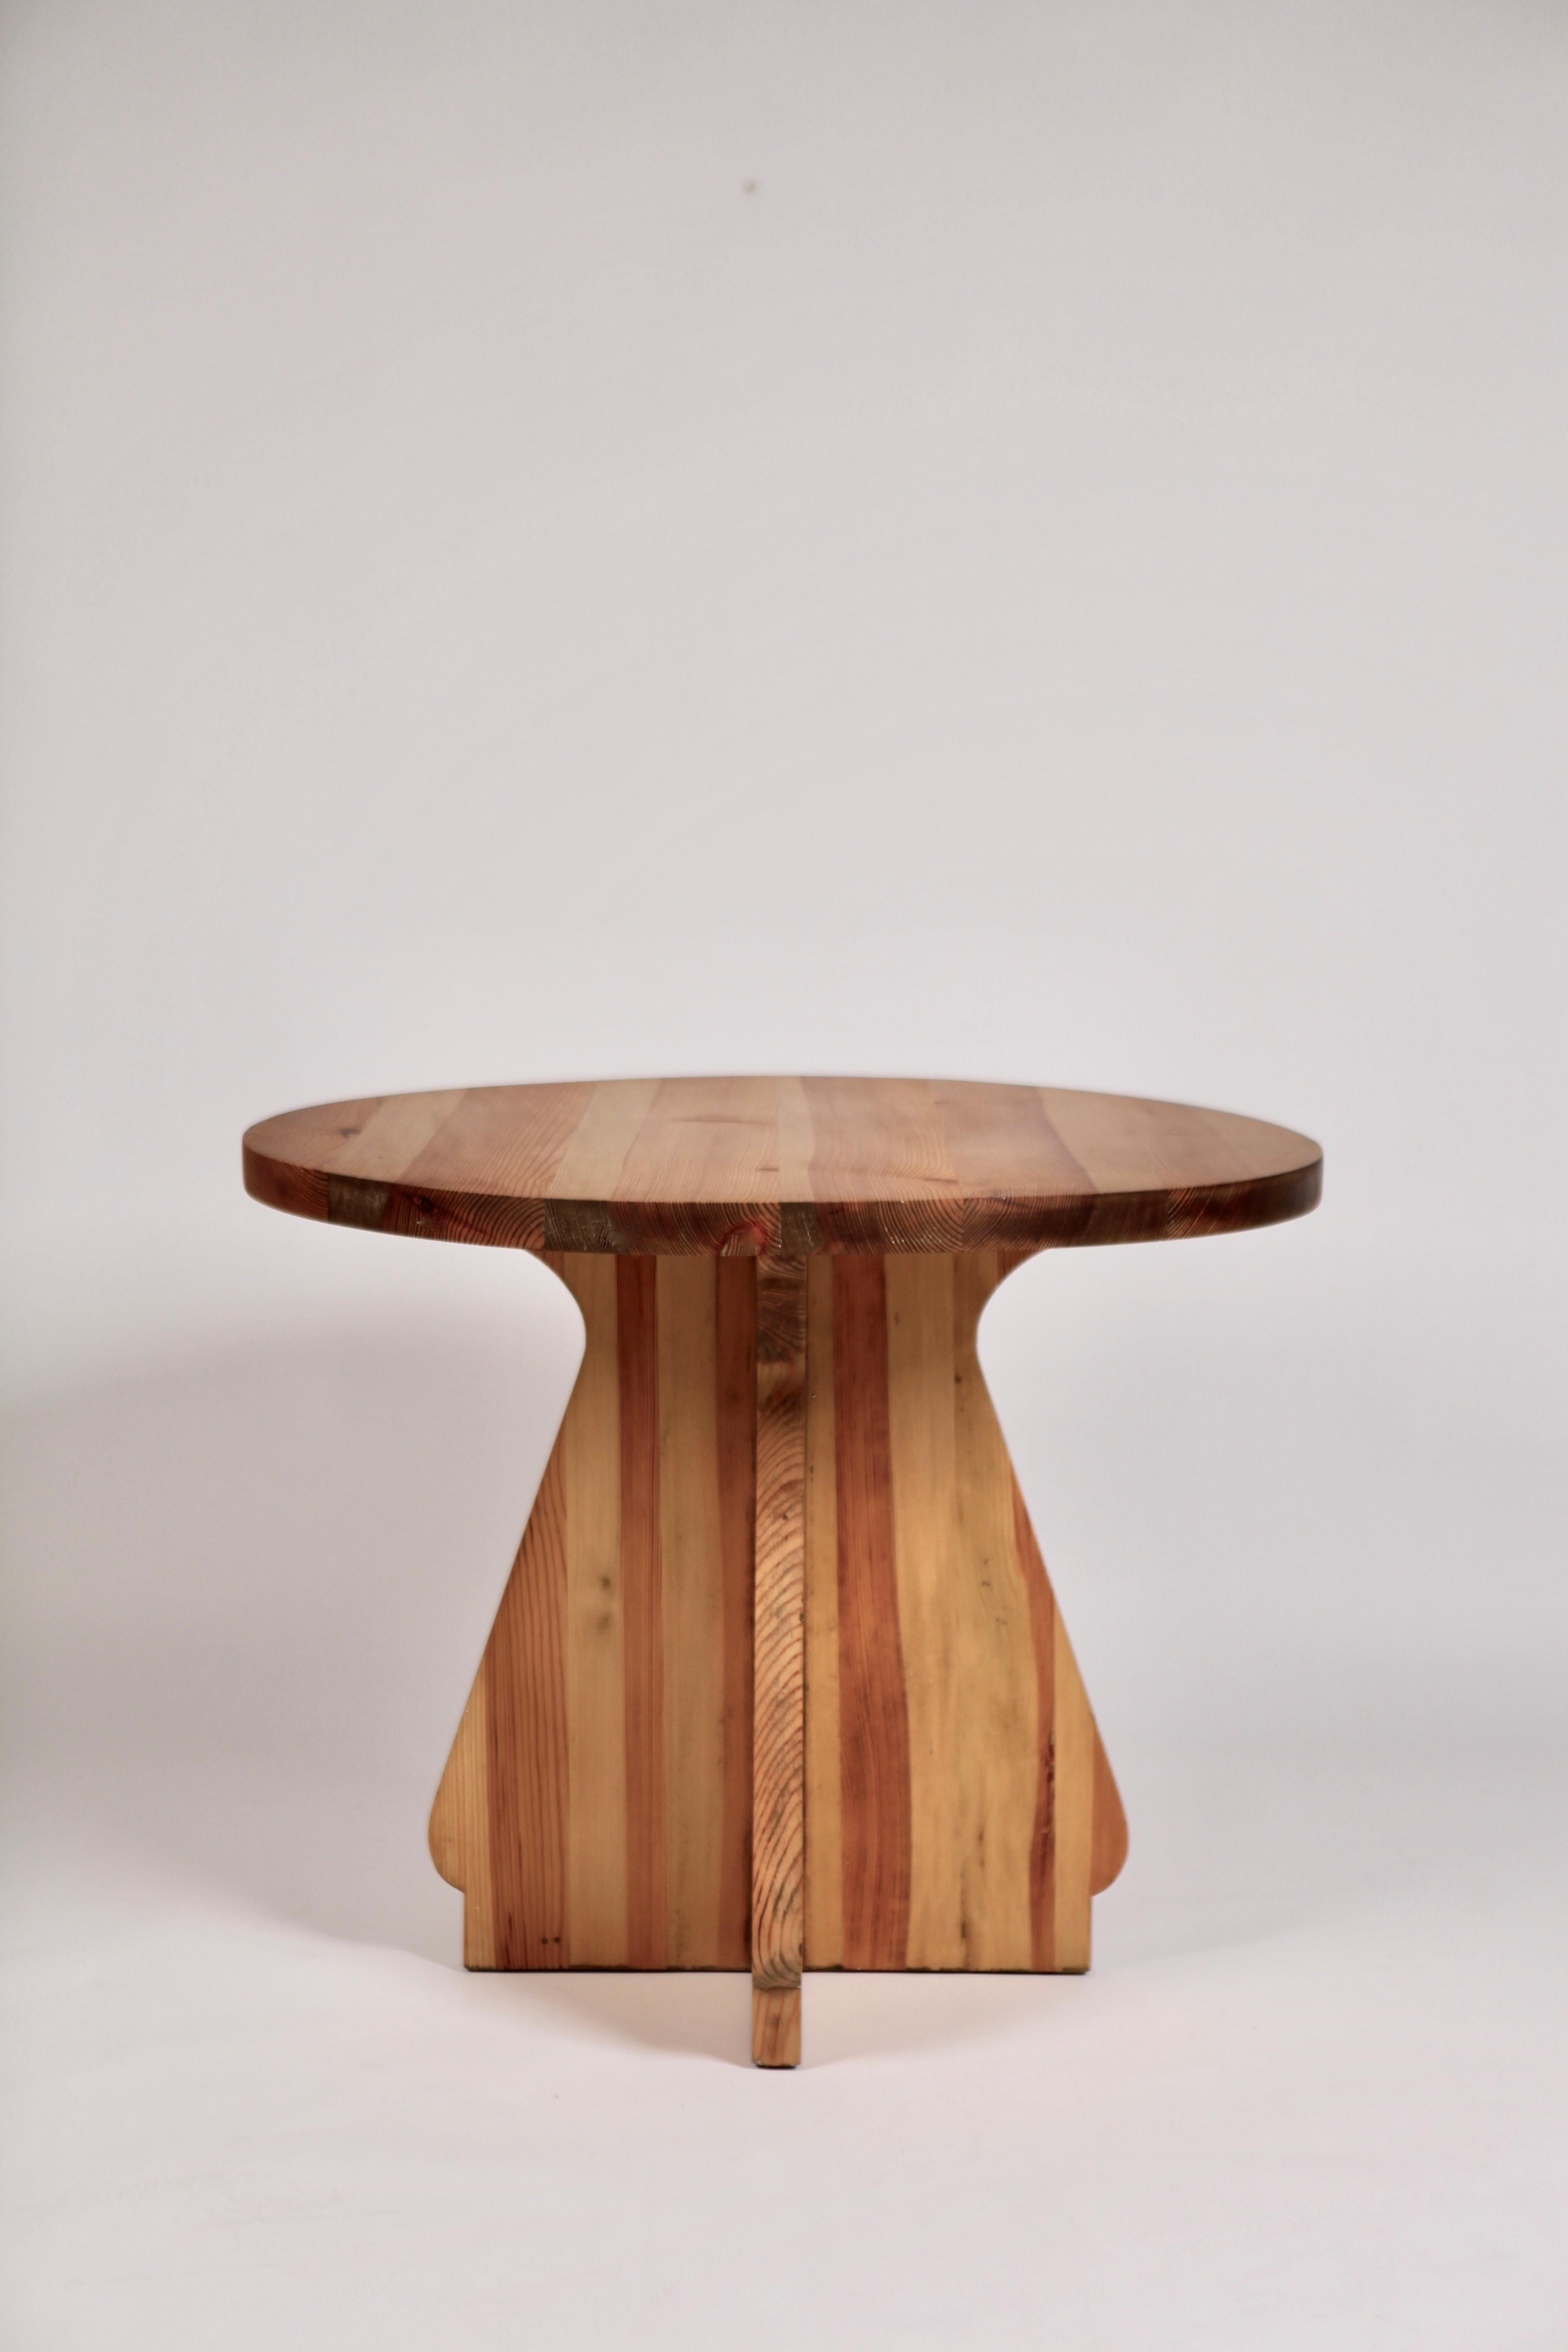 Stained Nordiska Kompaniet, Pine Table, Attributed to Axel Einar Hjorth, Sweden, 1940s